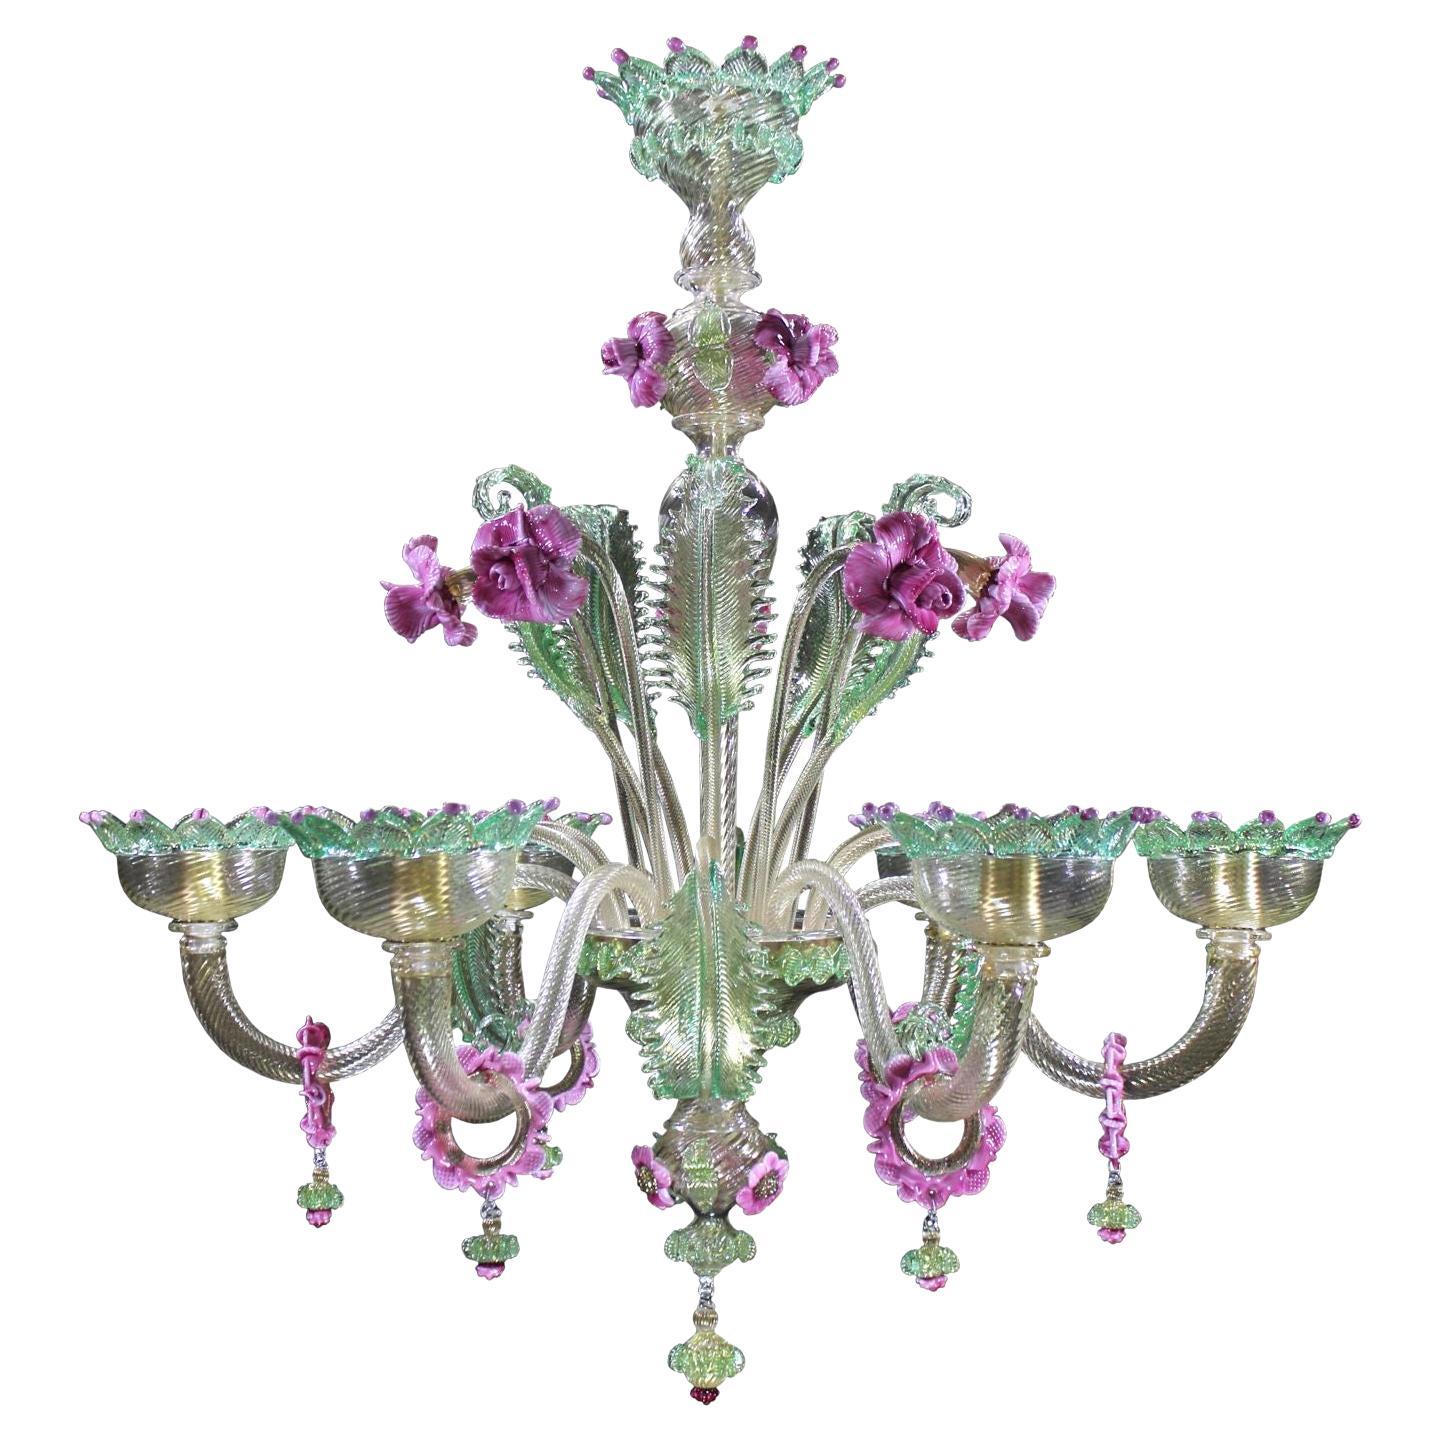 Artistic Chandelier 6 Arms Gold Murano Glass Pink and Gree Details by Multiforme For Sale